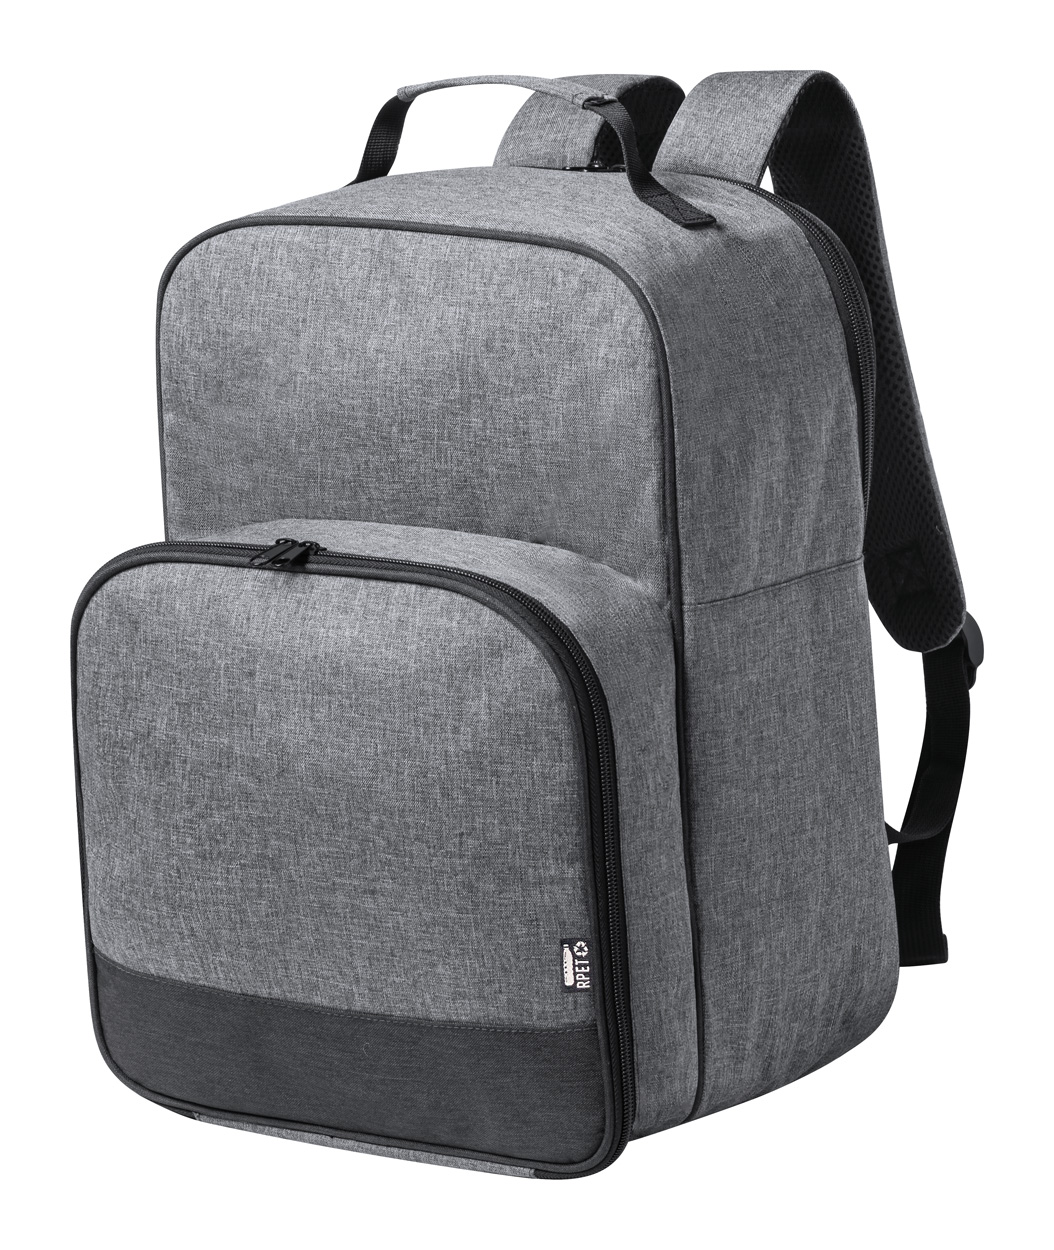 Cooling picnic backpack KAZOR made of recycled material - grey